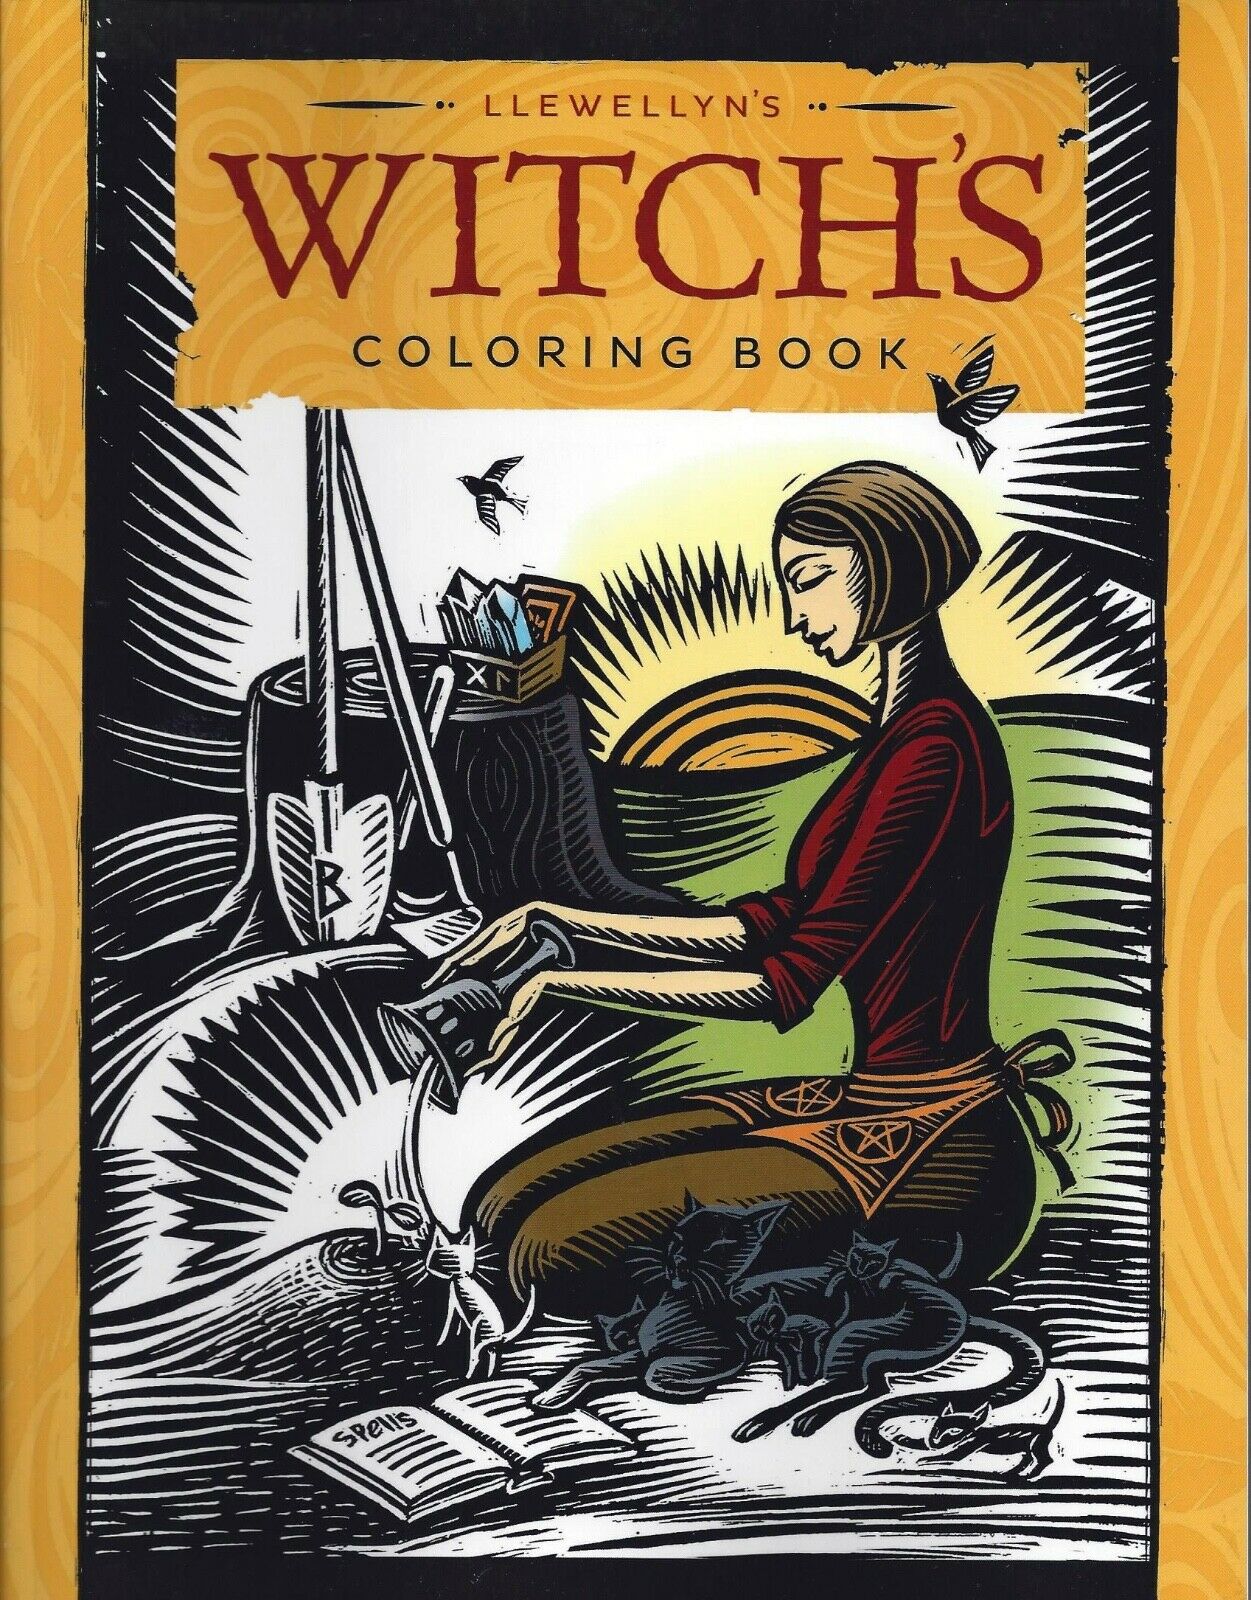 Llewellyn's Witch's Coloring Book Pagan Wicca Wicca Witch Craft Color Book